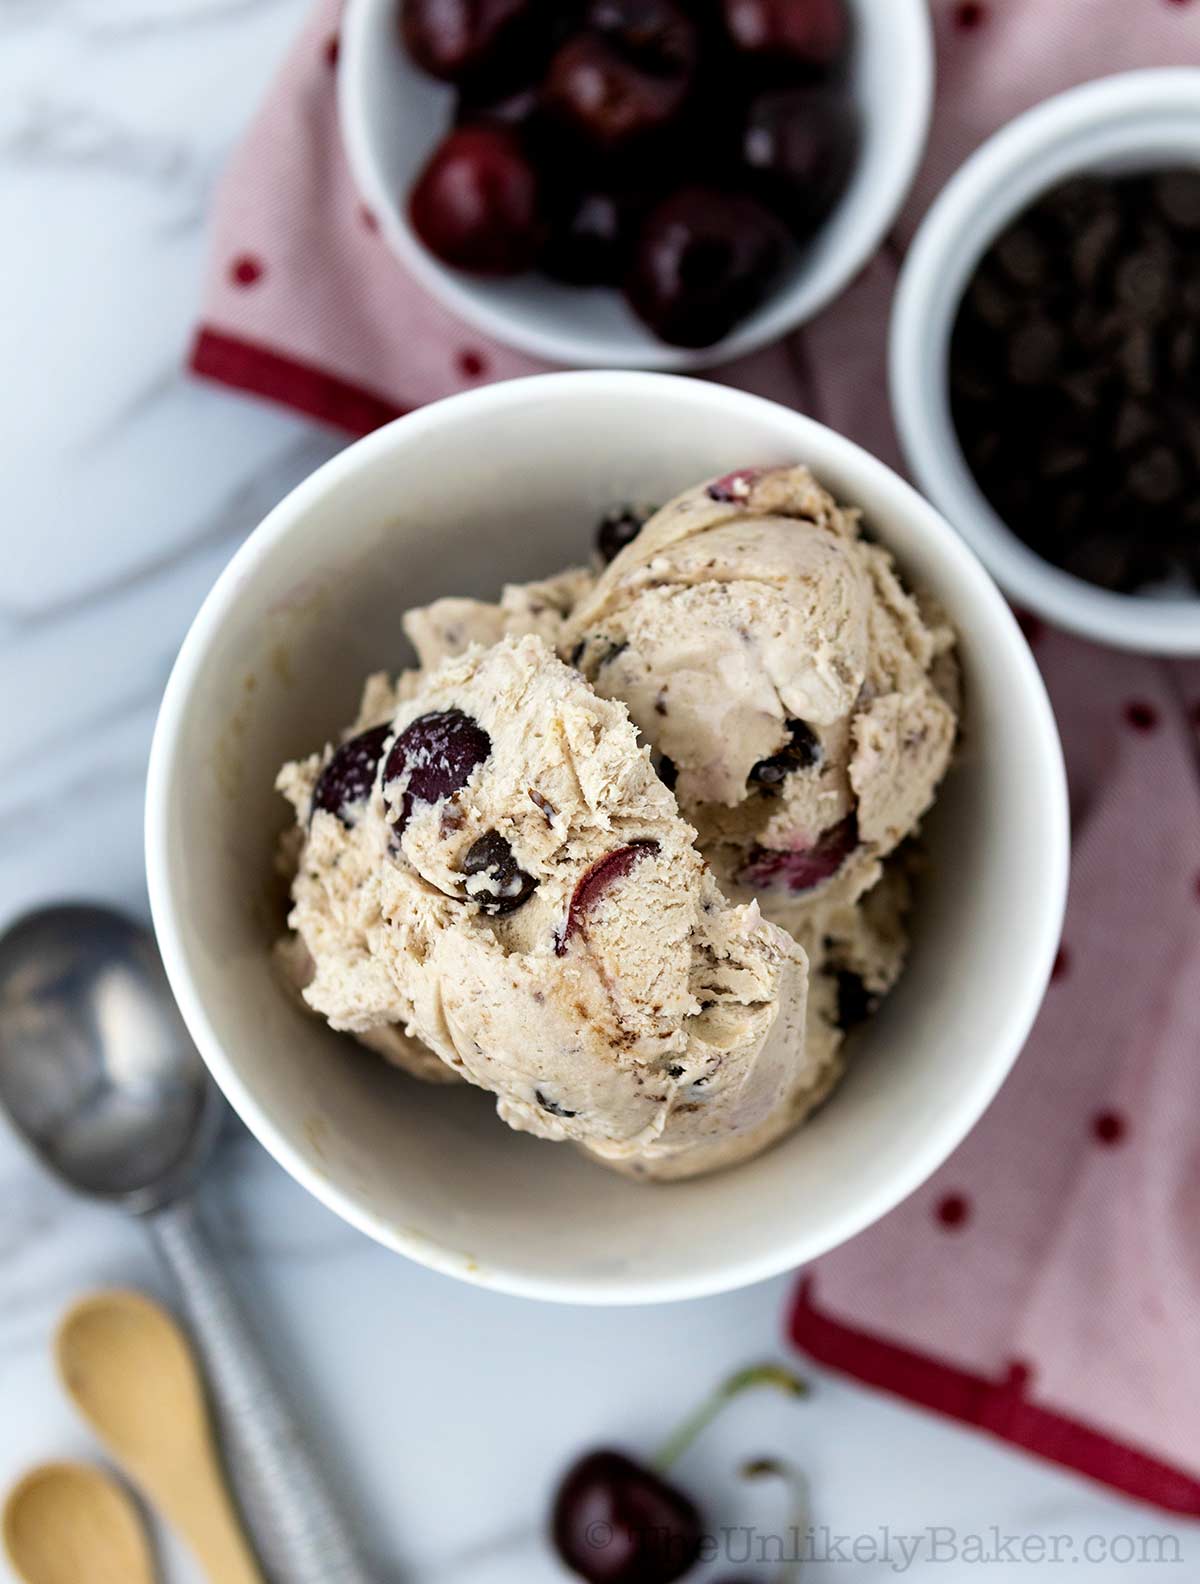 Scoop of cherry ice cream with chocolate chips in a bowl.